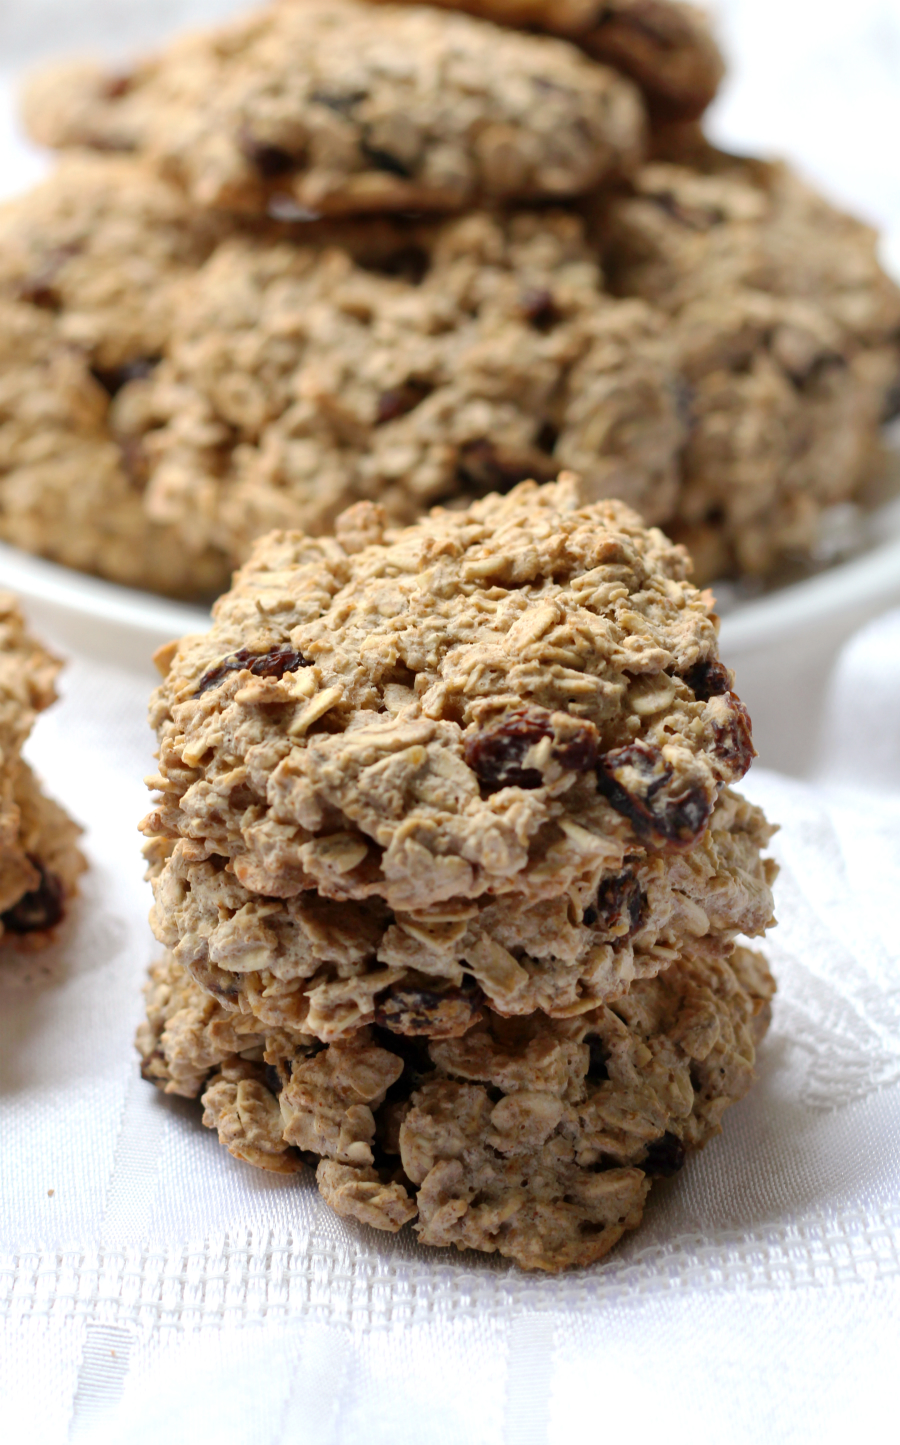 Chewy Gluten-Free Oatmeal Raisin Cookies (Allergy-Free, Vegan) | Strength and Sunshine @RebeccaGF666 Your favorite "healthy" cookies, now gluten-free, allergy-free, and vegan! These Chewy Gluten-Free Oatmeal Raisin Cookies are an easy dessert recipe to bake up any day of the week when the craving for a sweet snack hits!